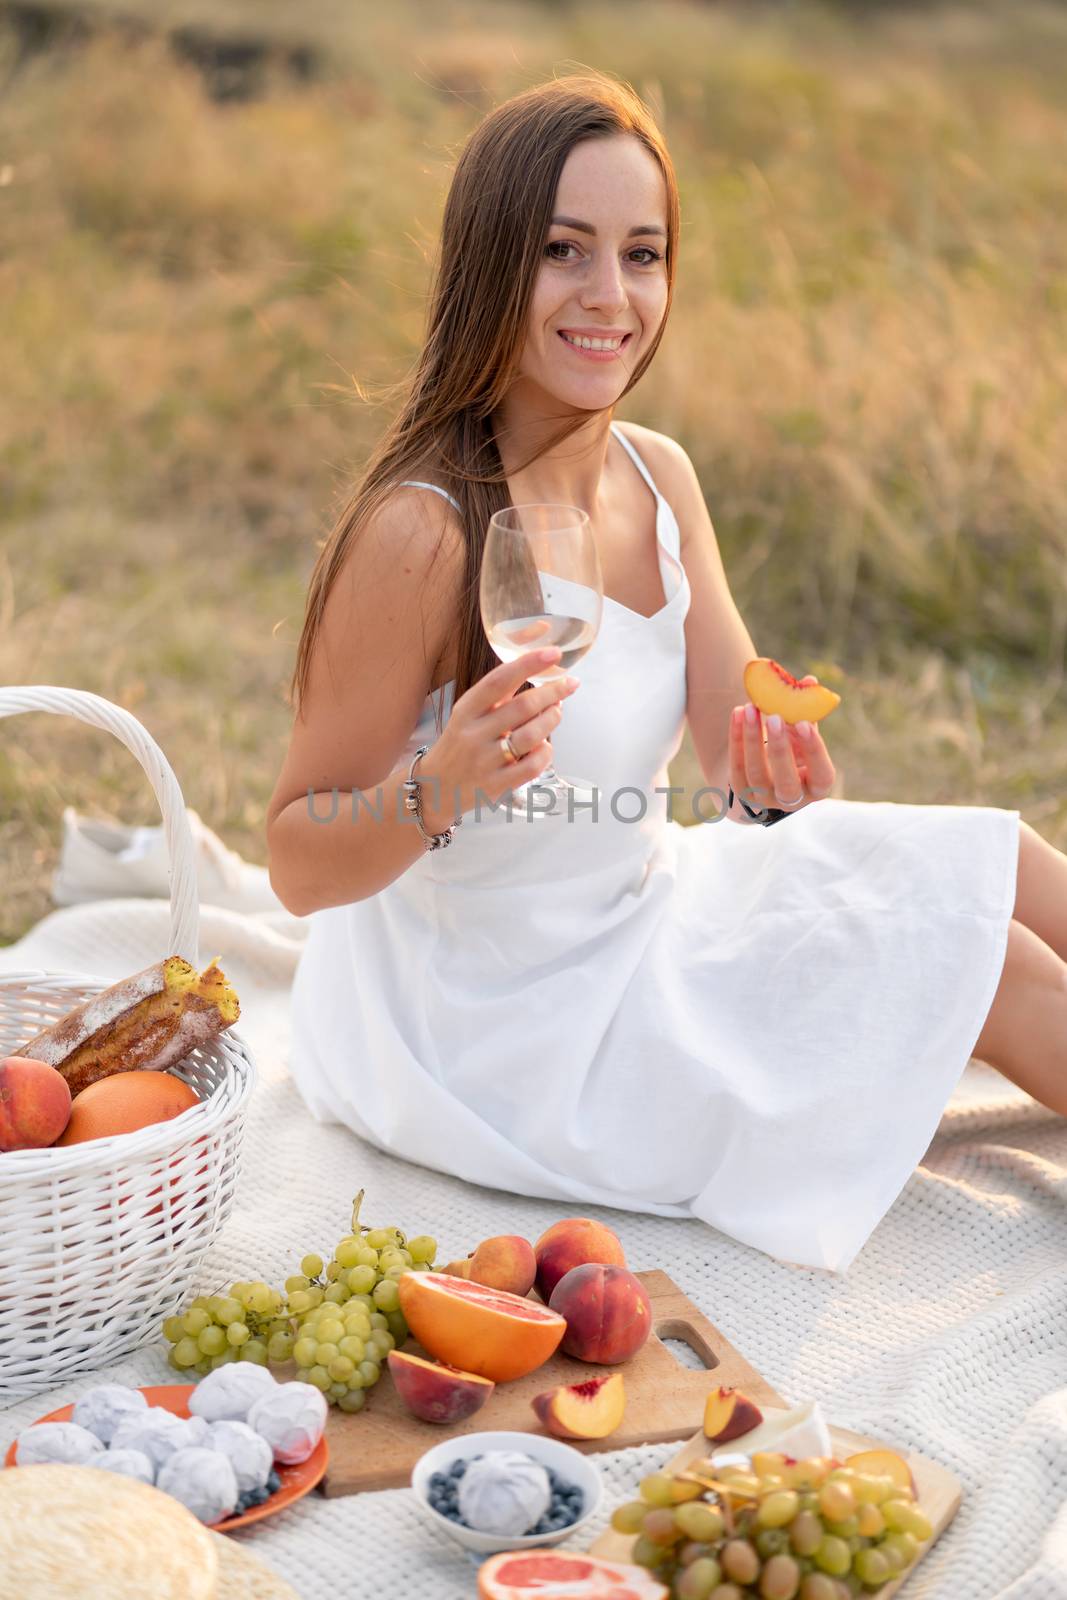 Gorgeous young brunette girl in a white sundress enjoying a picnic in a picturesque place. Romantic picnic by Try_my_best